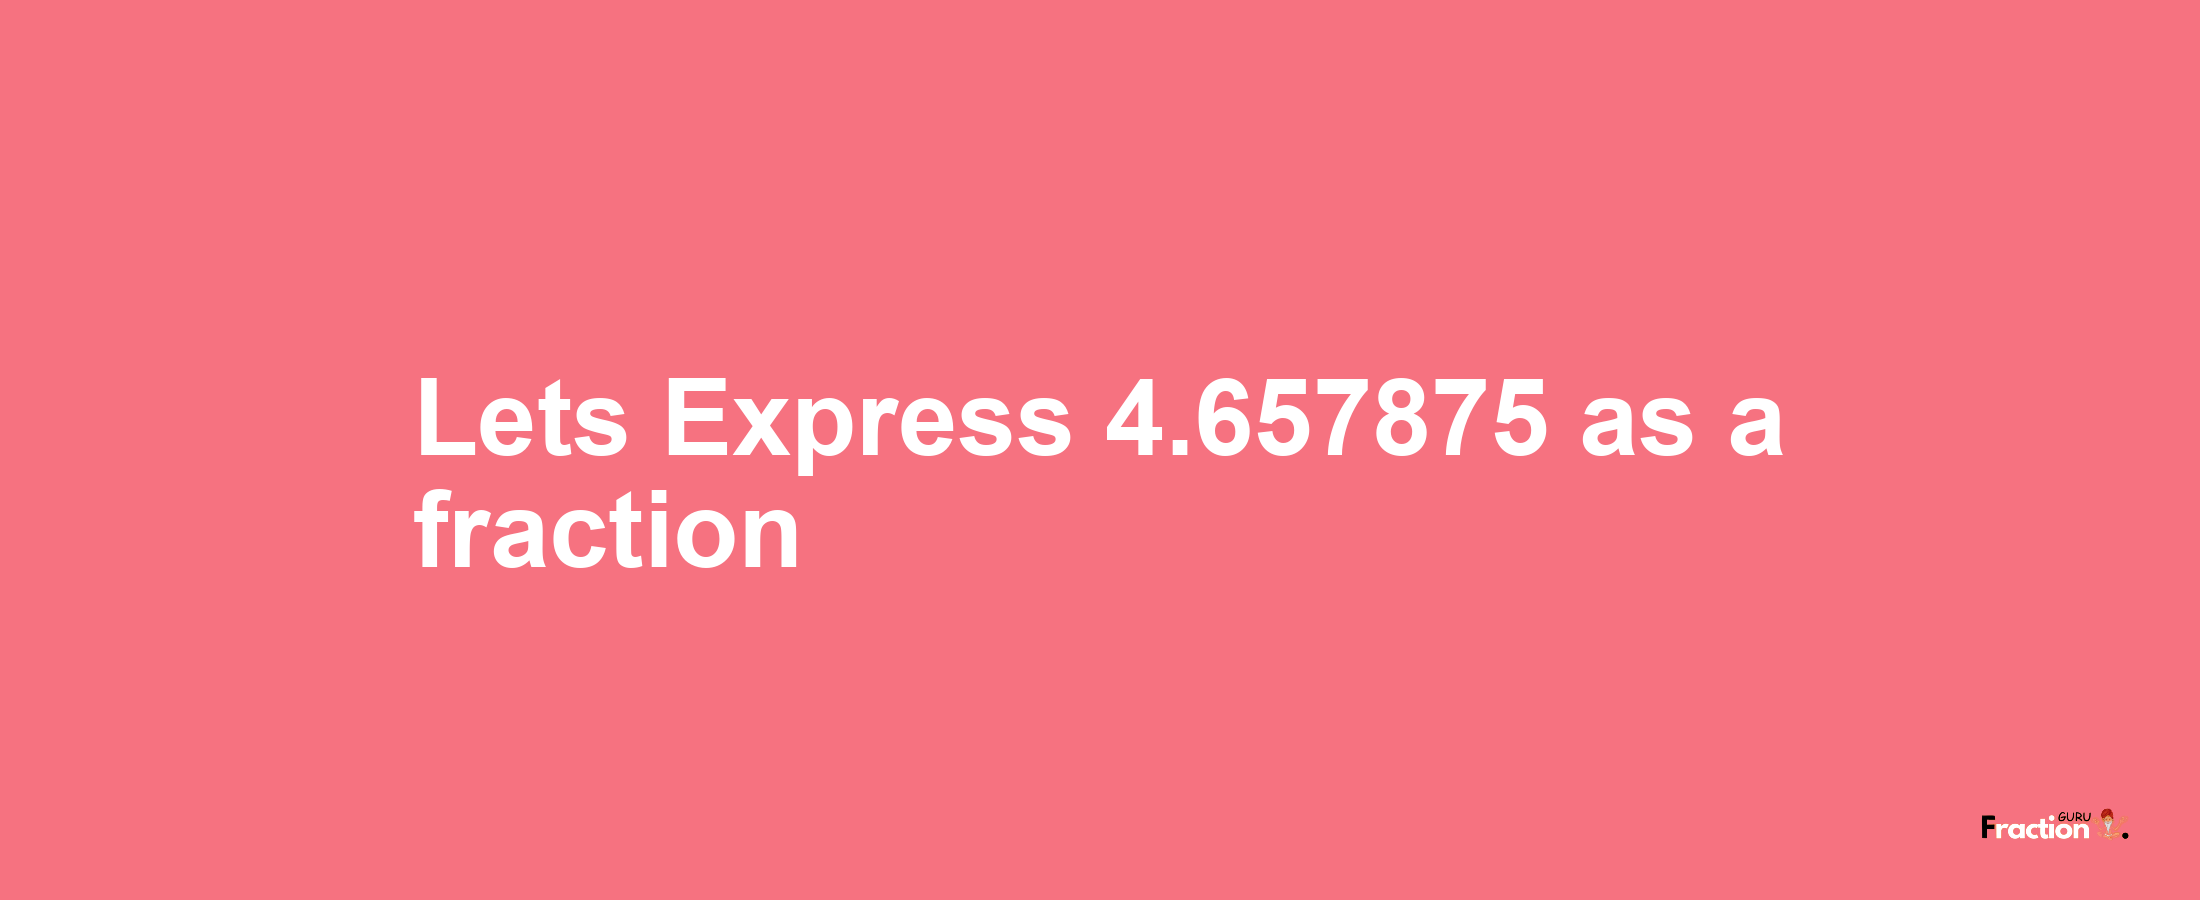 Lets Express 4.657875 as afraction